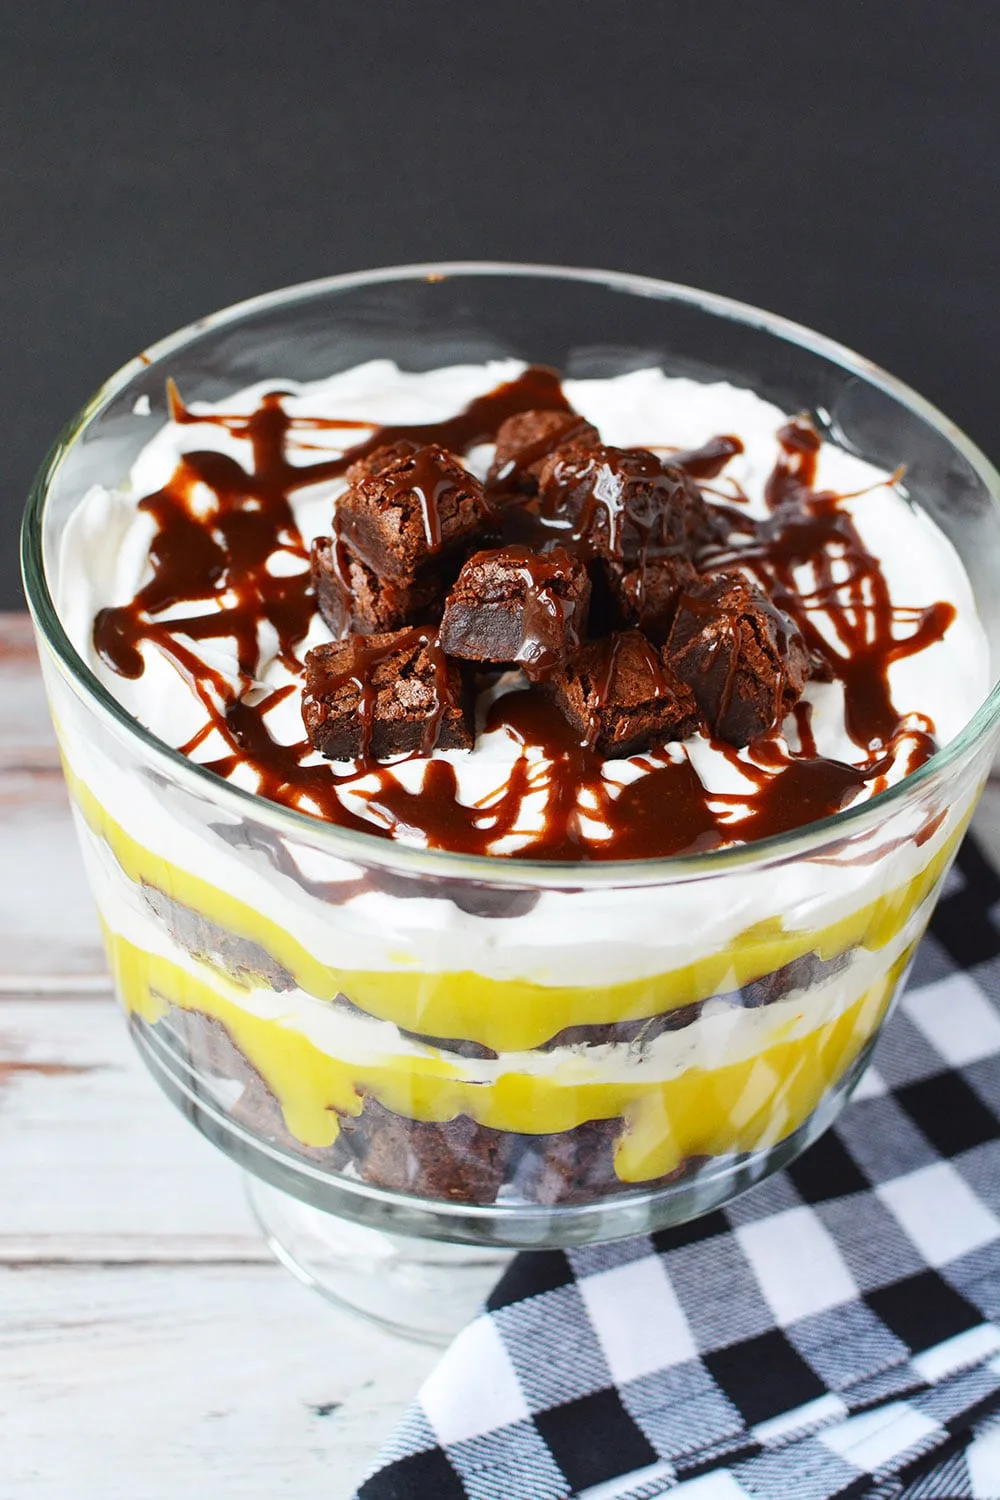 Brownie trifle on a table with a blue checked napkin.